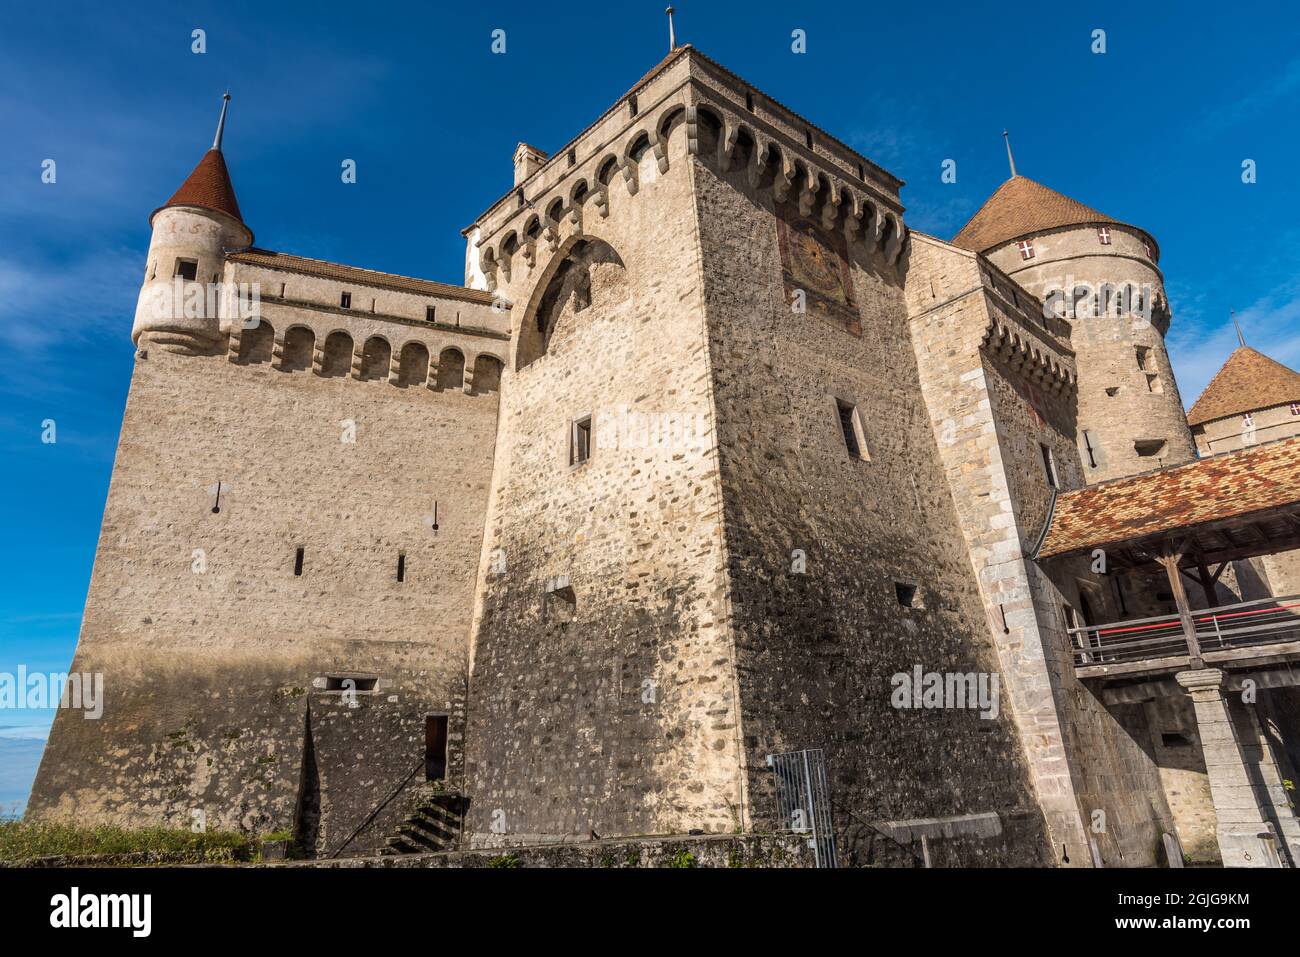 Partial view of Chateau Chillon in lake Geneve, Switzerland. High quality photo Stock Photo